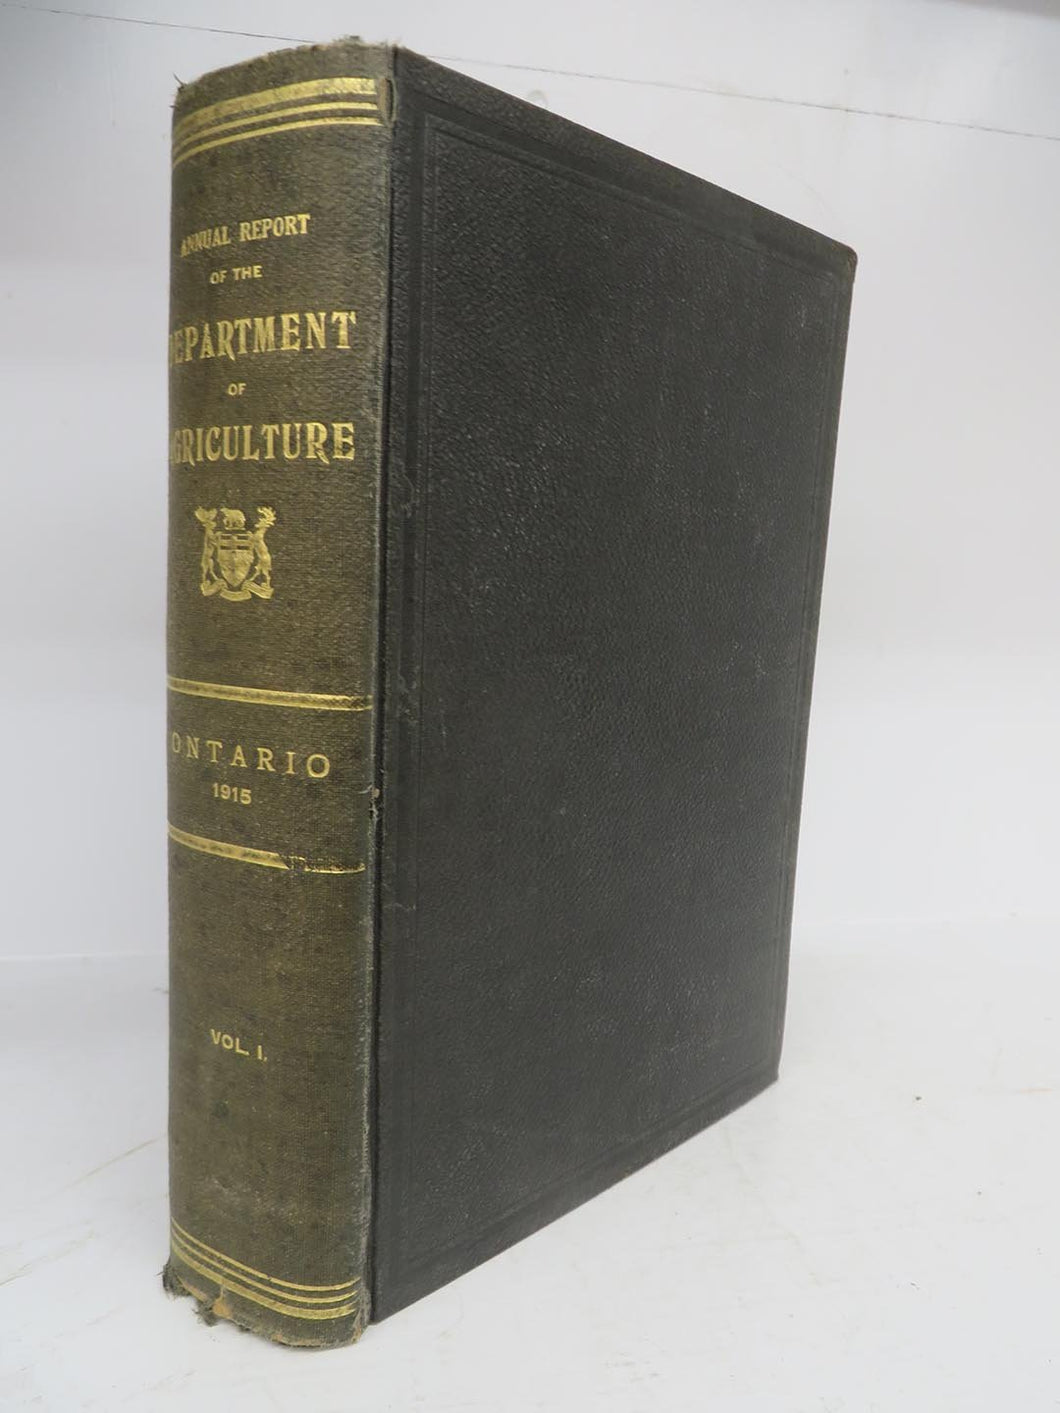 Annual Report of the Department of Agriculture of the Province of Ontario. 1915: Vol. I